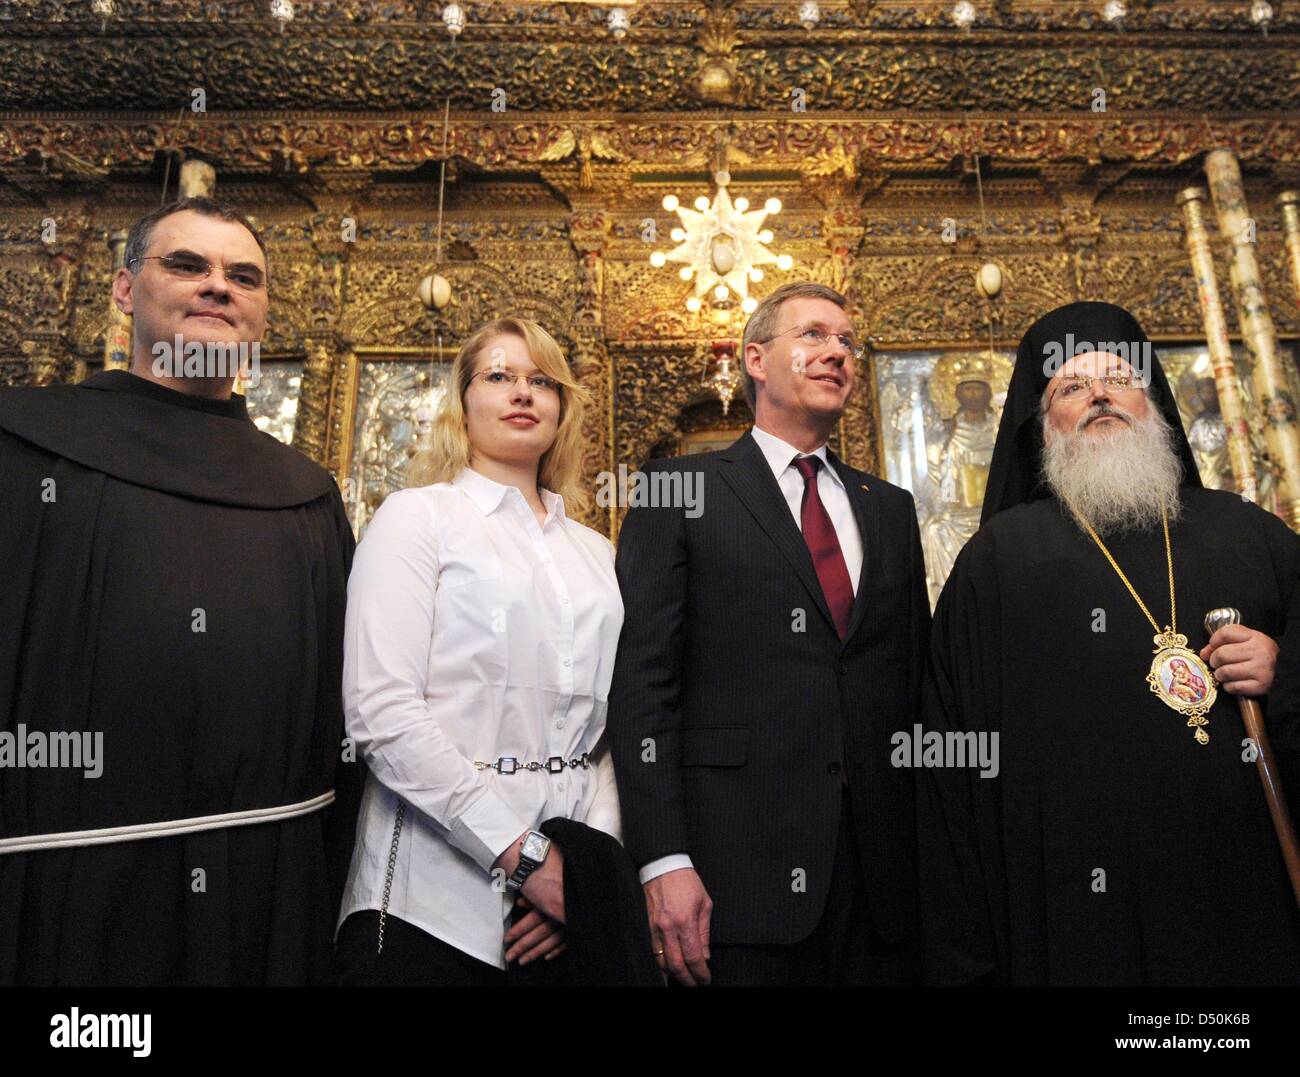 German President Christian Wulff (2-R), his daughter Annalena, Greek-Orthodox Bishop Theoflakes (R) and the head of the Franciscan parish Father Marwan Daadas (L) walk through the Church of the Nativity in Bethlehem, Palestinian Territories, 30 November 2010. The four-day state visit of German President Wulff will end today with his visit to the Palestinian Territories. Photo: RAIN Stock Photo